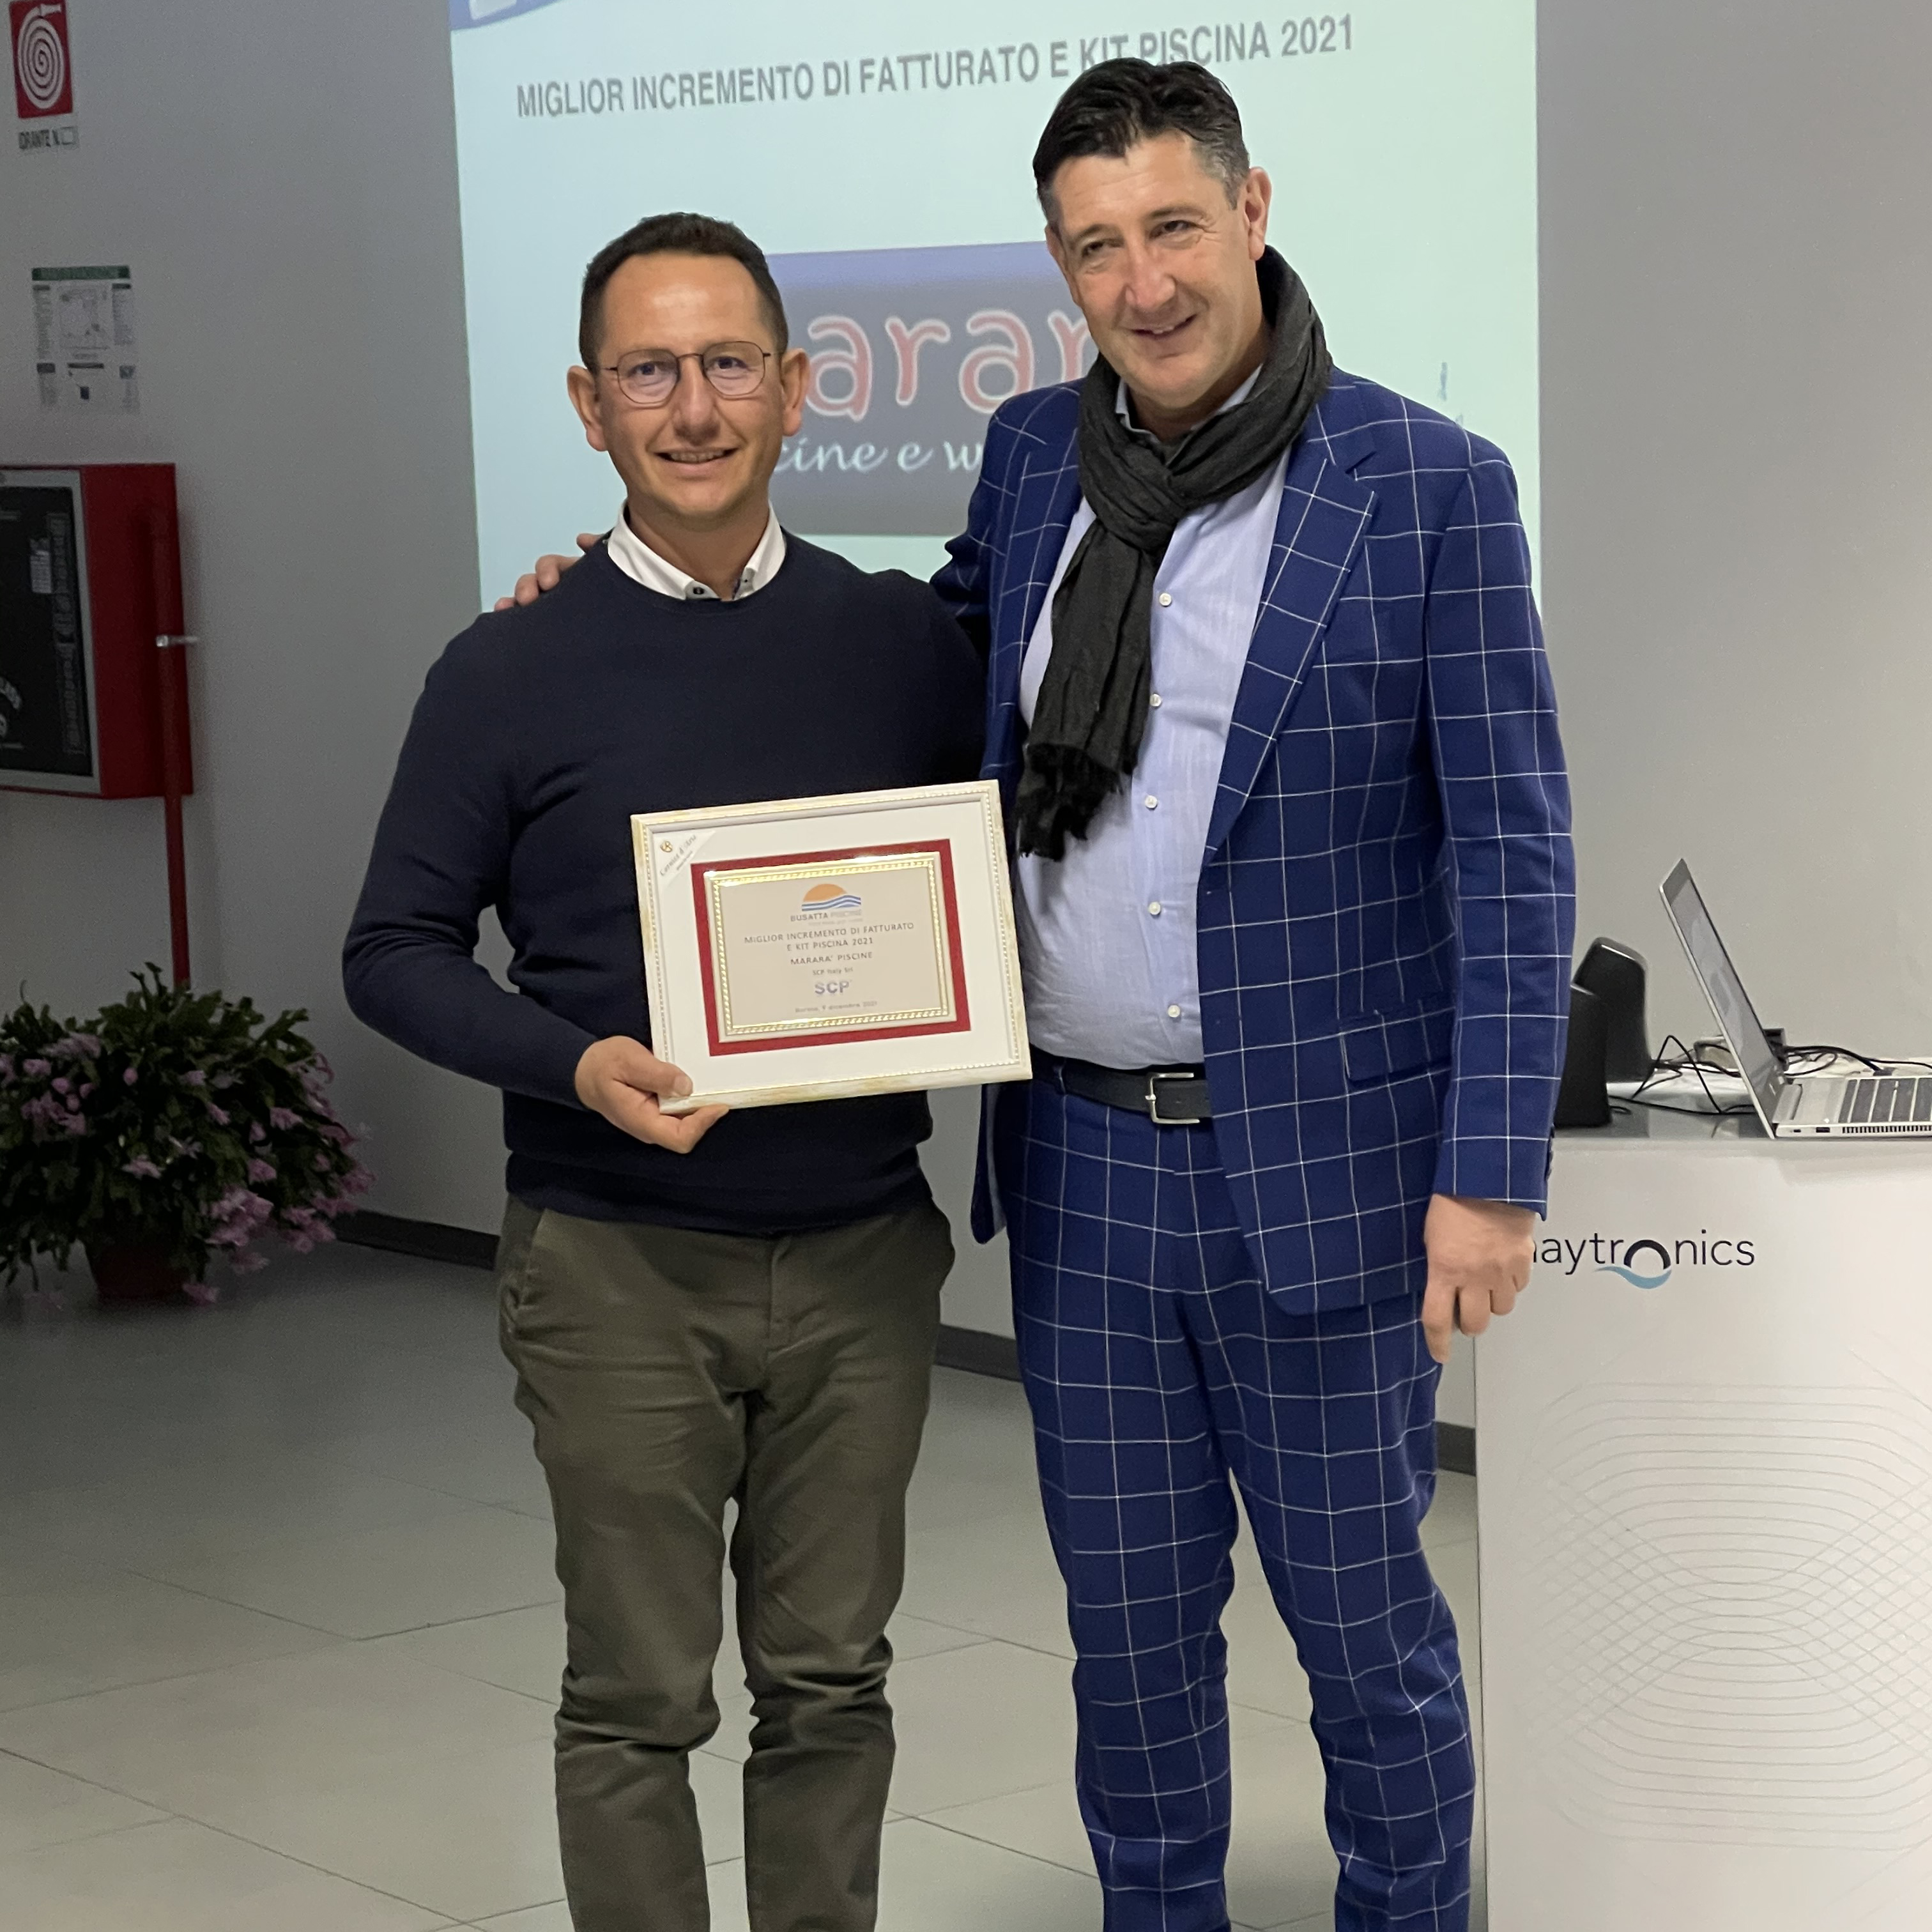 Best Increase in Turnover and Pool Kit 2021 Award, Mararà Piscine from Caltanissetta